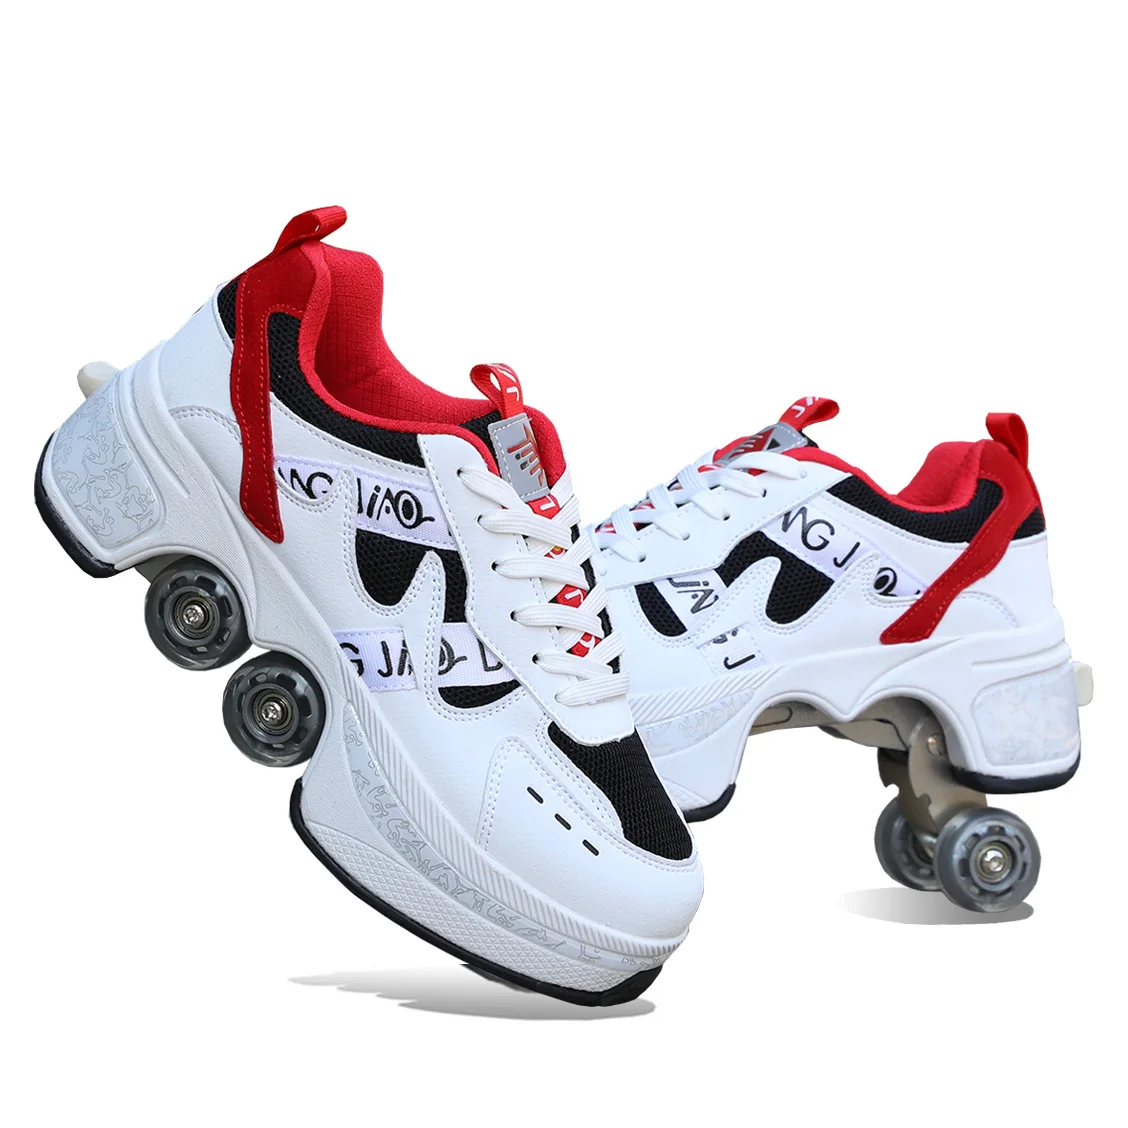 Pu Leather Adult Sport Roller Skate Shoes With 4-Wheel Casual Deformation Parkour Sneakers Skates For Rounds Children Of Running